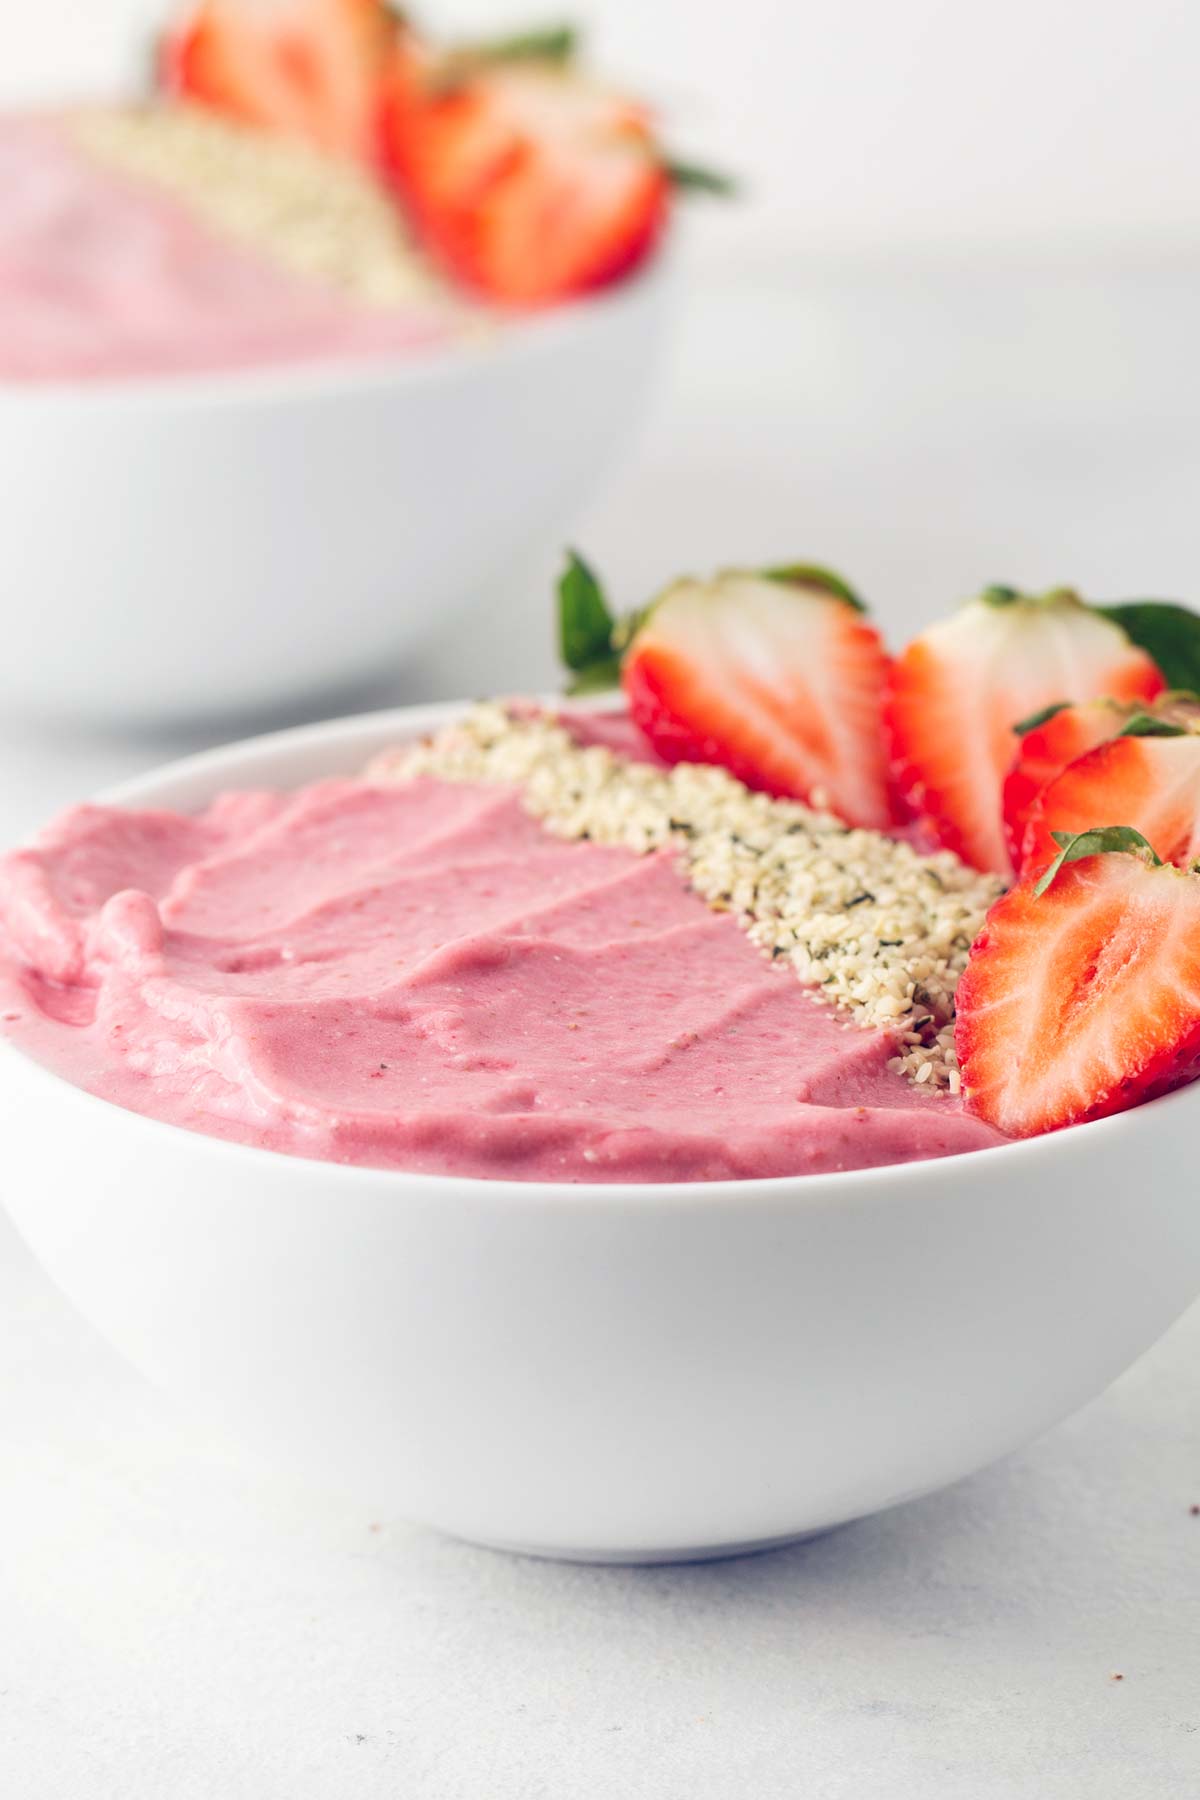 Strawberry protein smoothie bowl on a gray table.